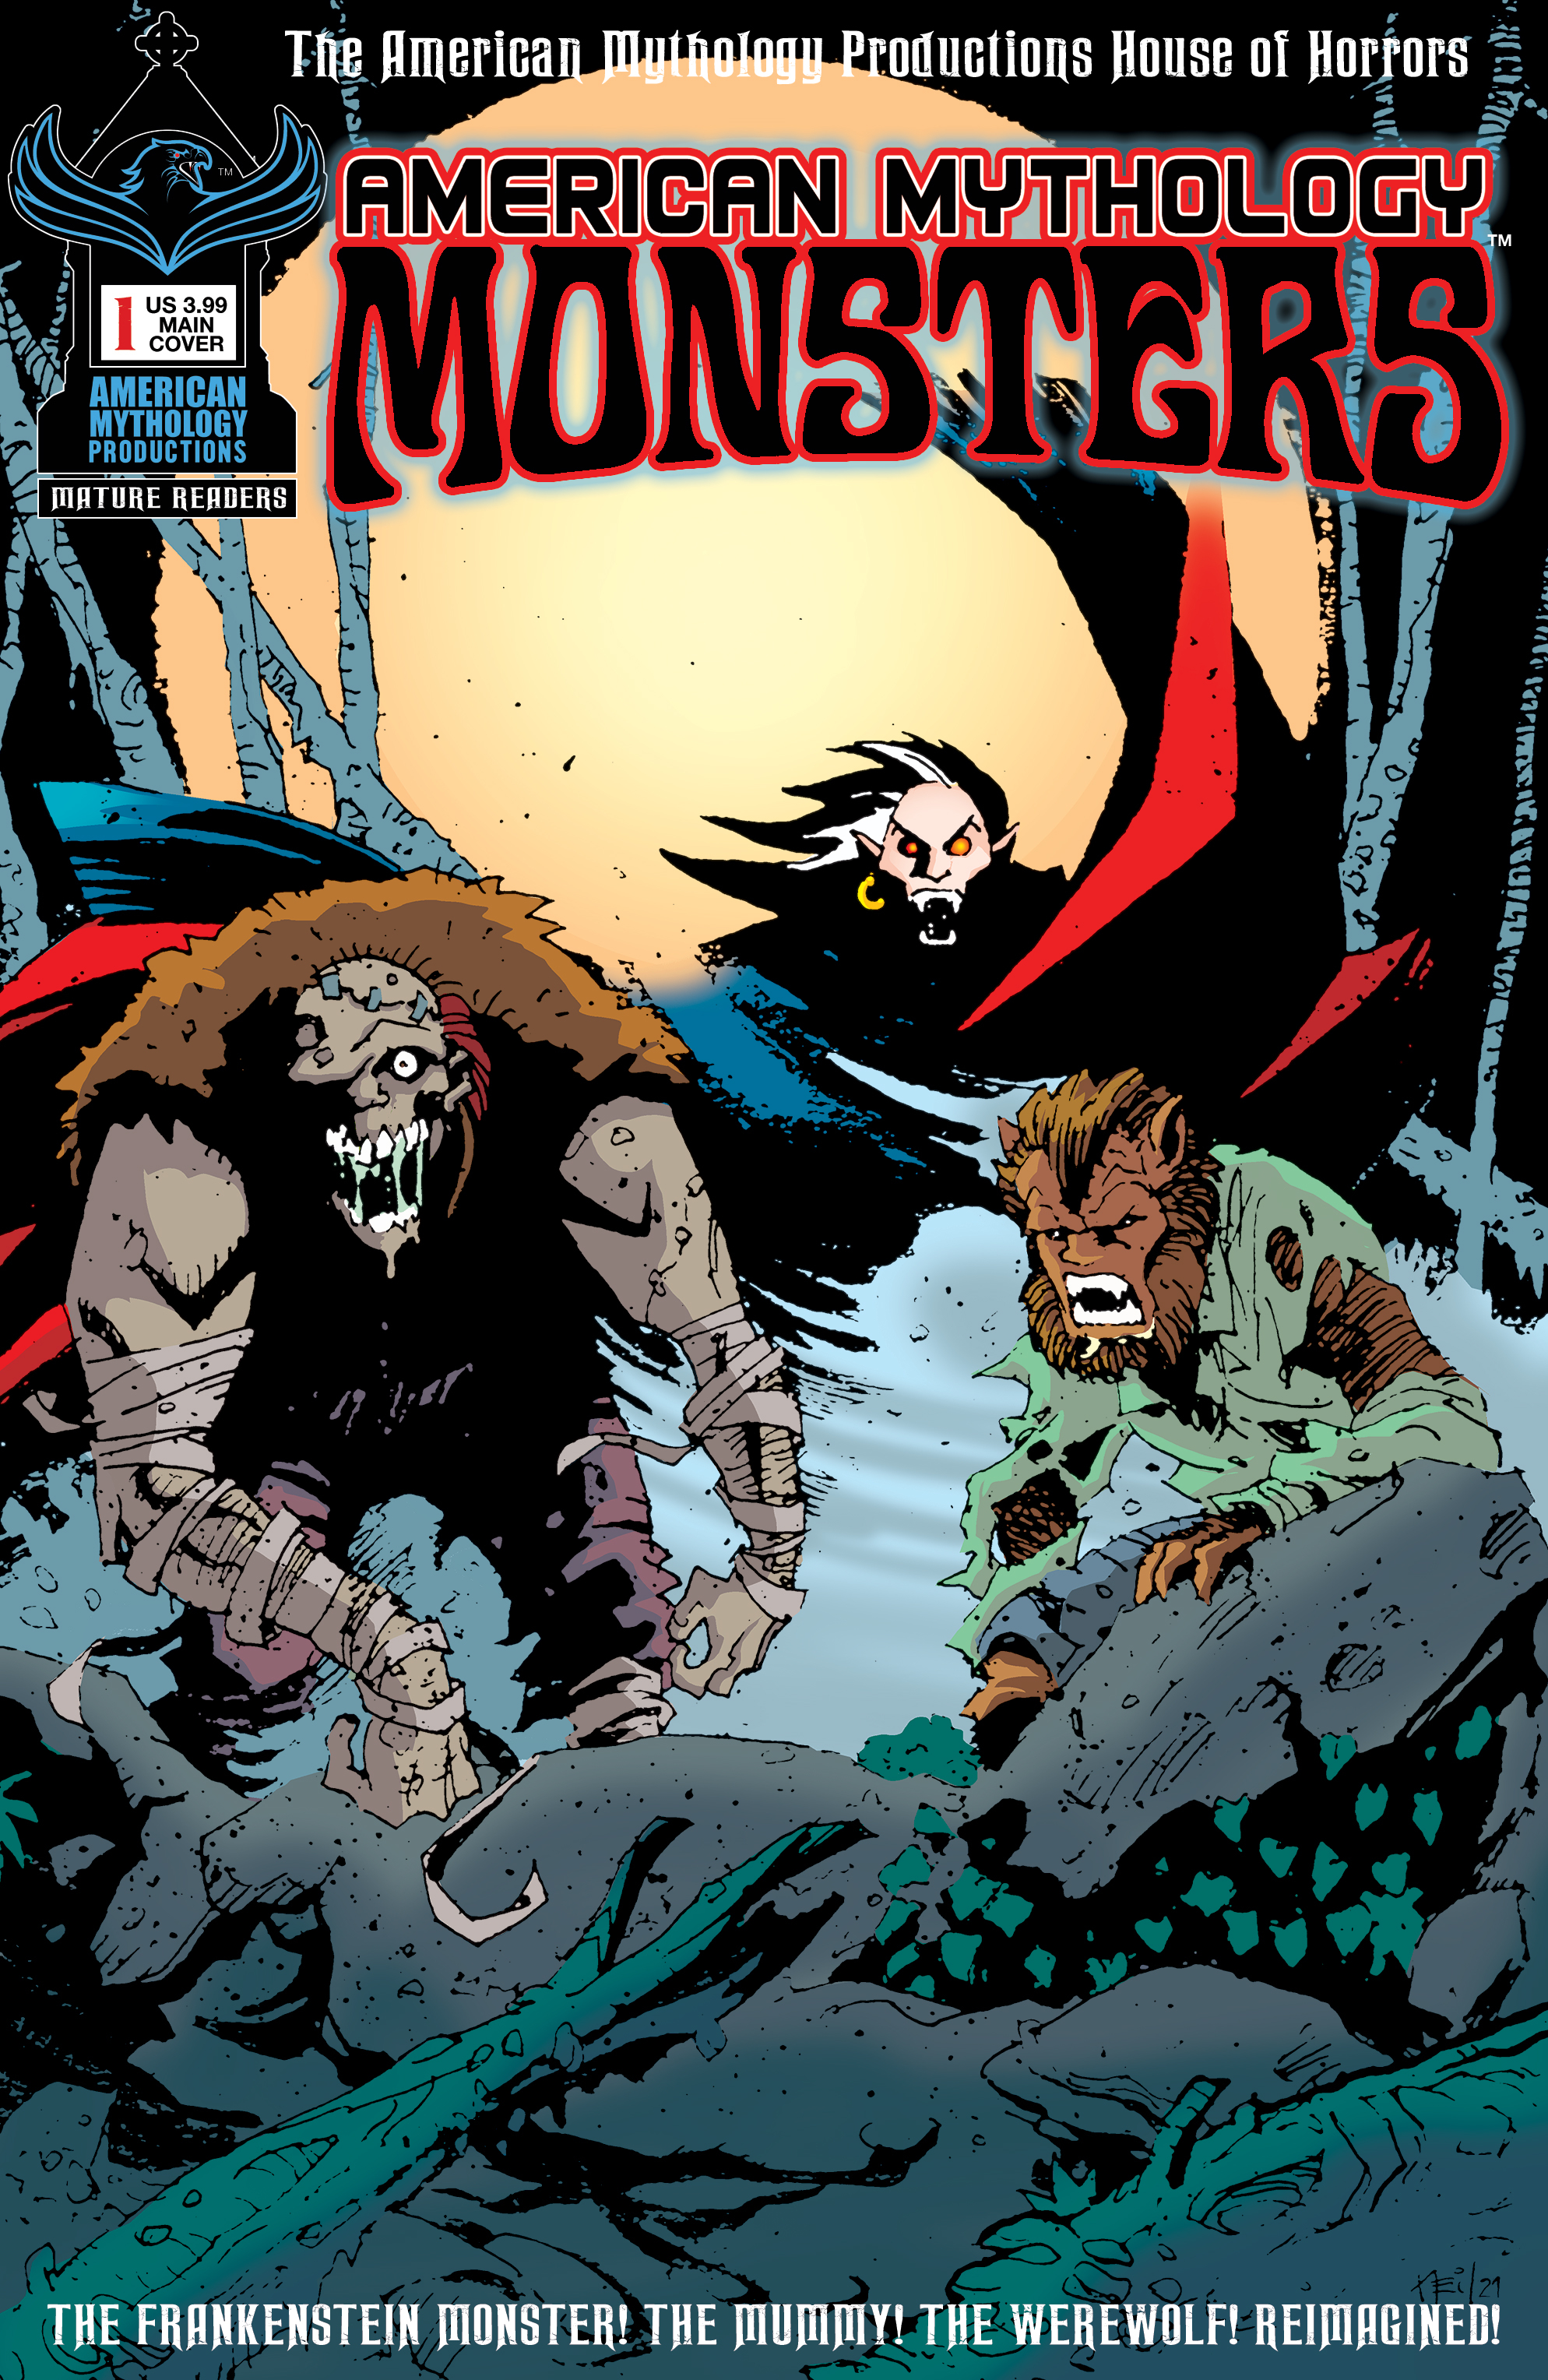 American Mythology Monsters Volume 2 #1 Cover A Vokes (Mature)